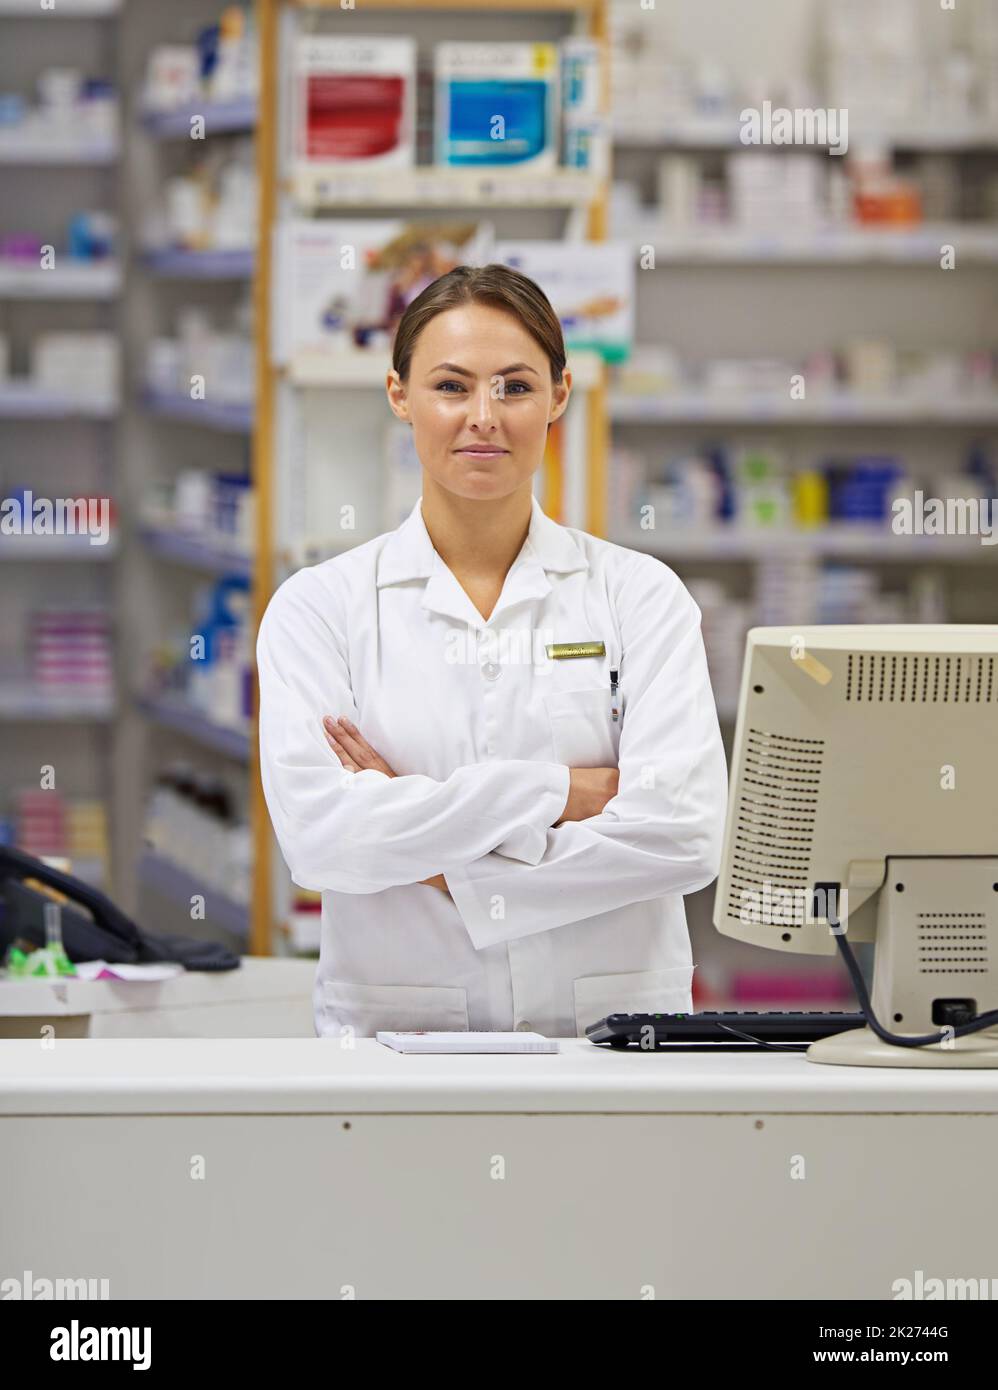 Treatments begin with her. Portrait of an attractive young pharmacist standing at the prescription counter. Stock Photo